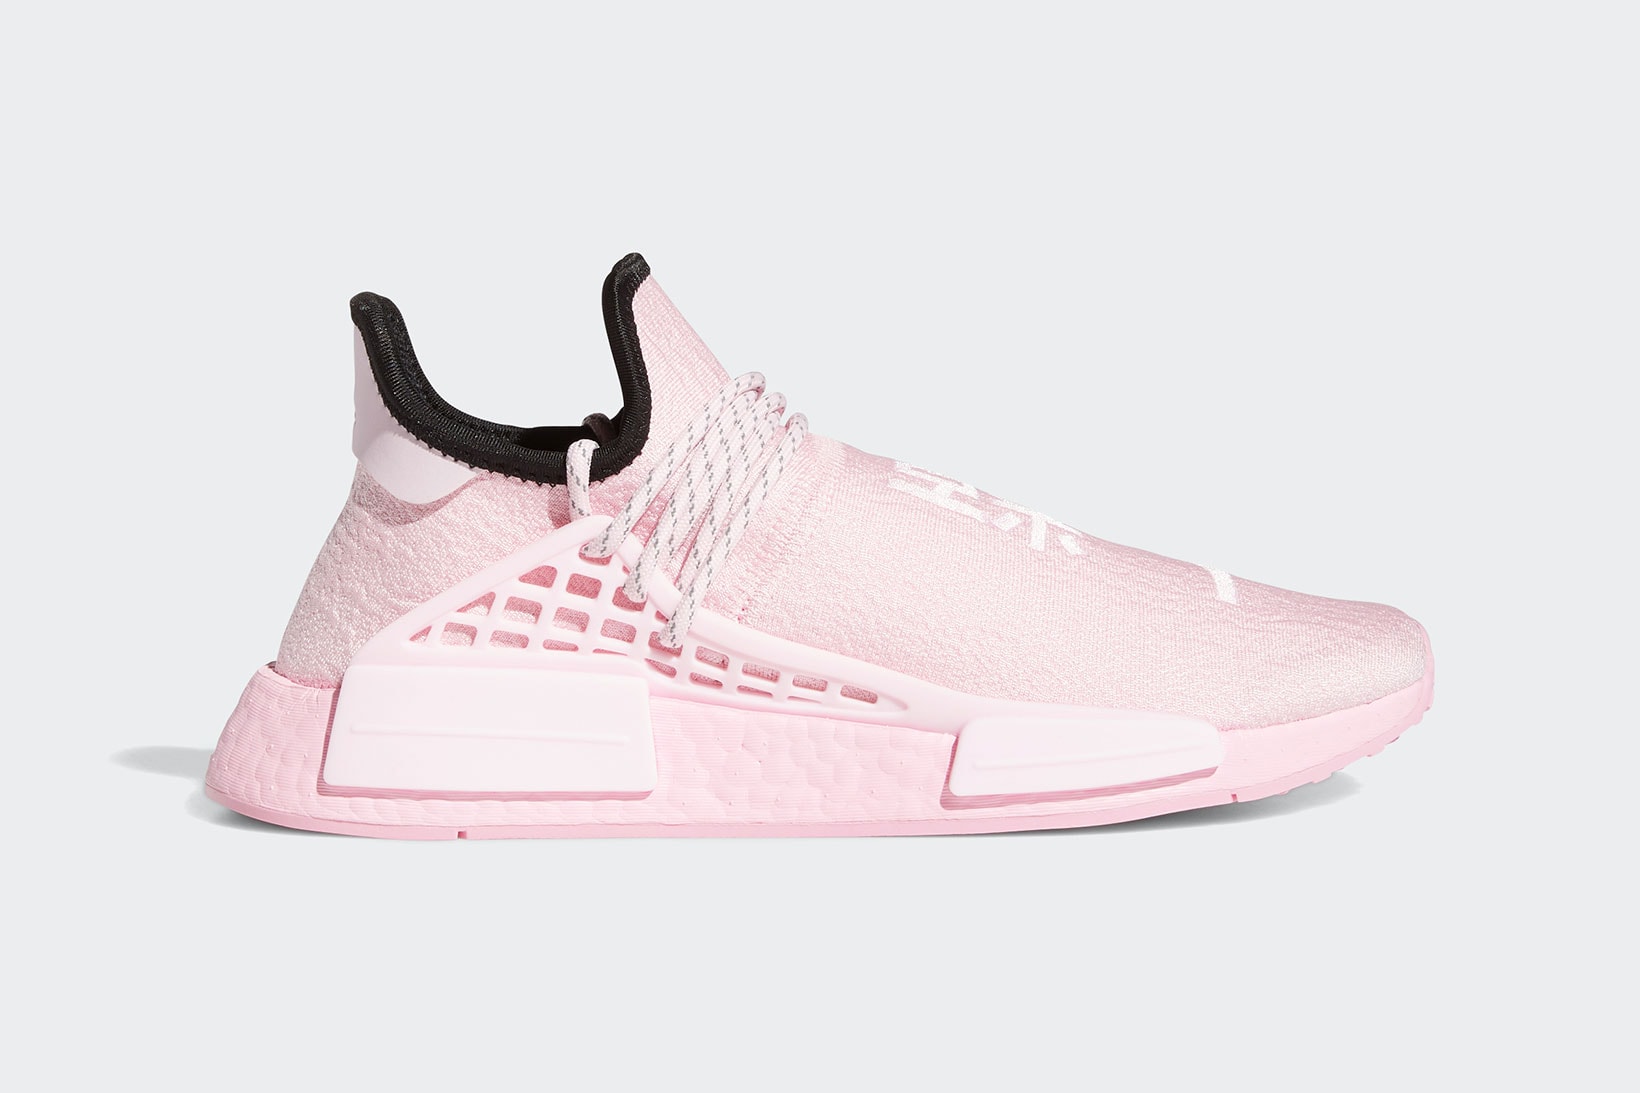 The Adidas Pharrell Williams Collab Is Back at It!